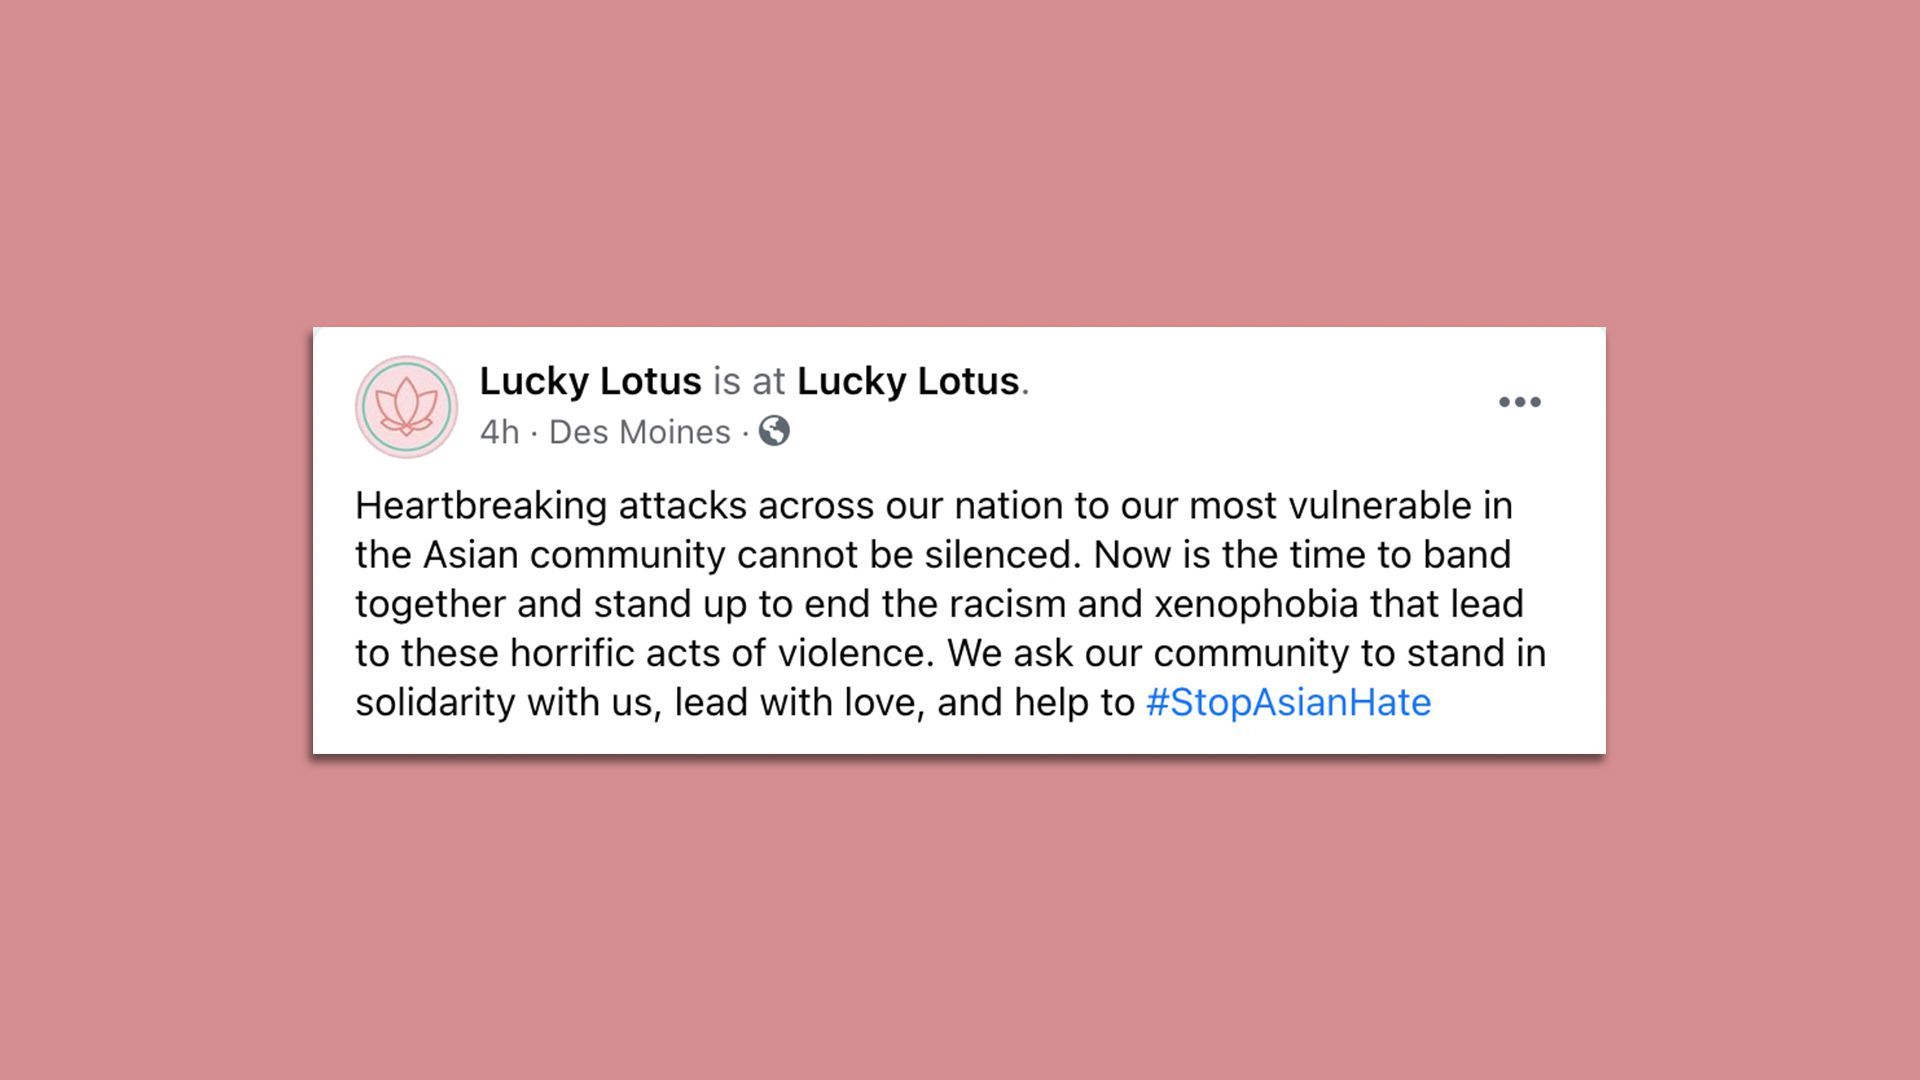 A screenshot of a Facebook post condemning Asian discrimination by Lucky Lotus, a restaurant in Des Moines